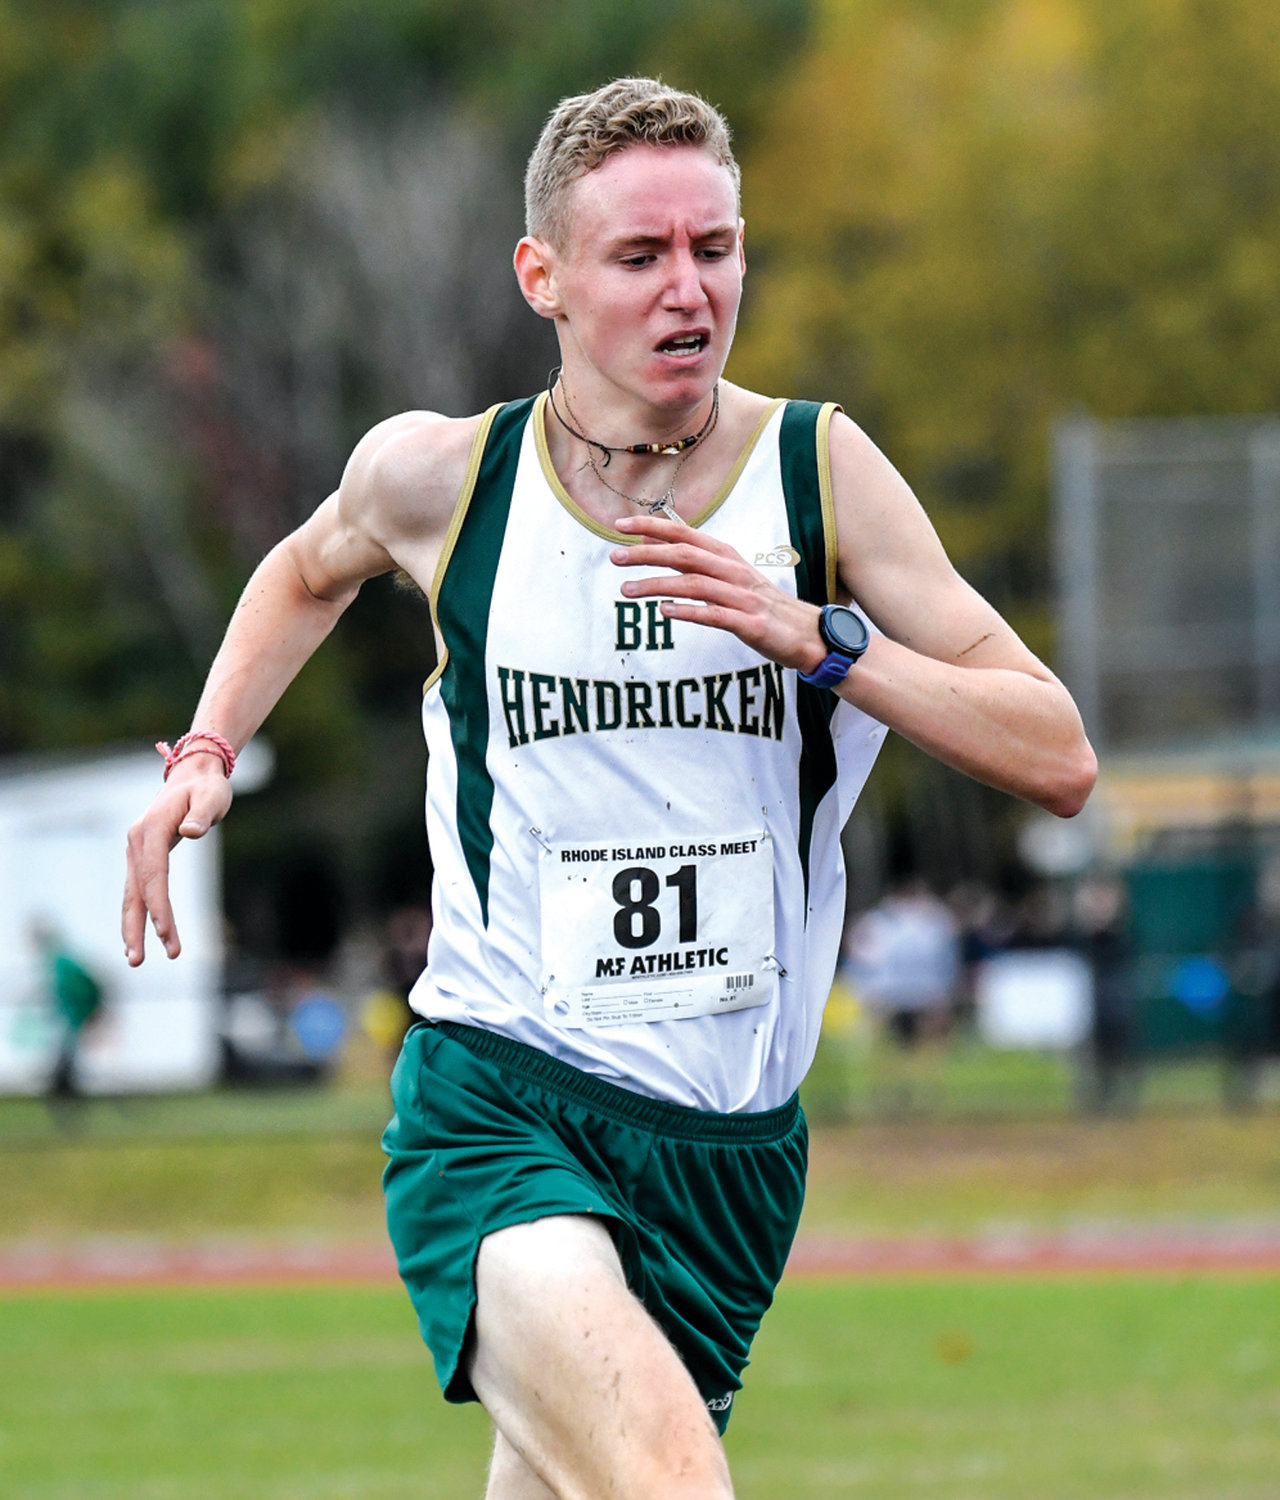 LEADING THE WAY: Evan Reynolds during the 2018 cross country season.